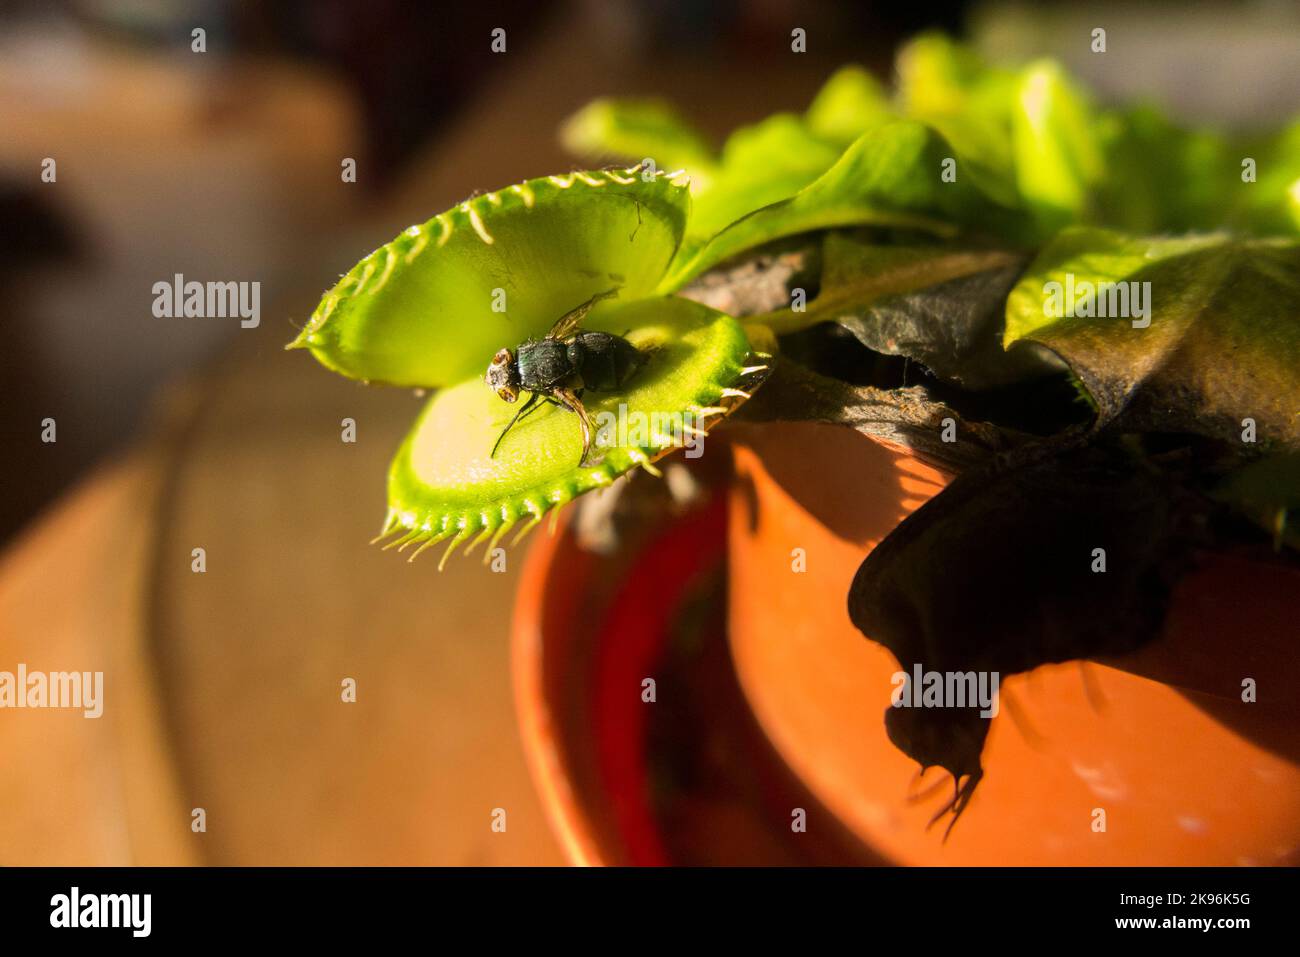 A long dead fly, caught by a Venus fly trap which has reopened its cage to reveal the body of the bluebottle housefly. Some leaves have died in autumn. UK (132) Stock Photo